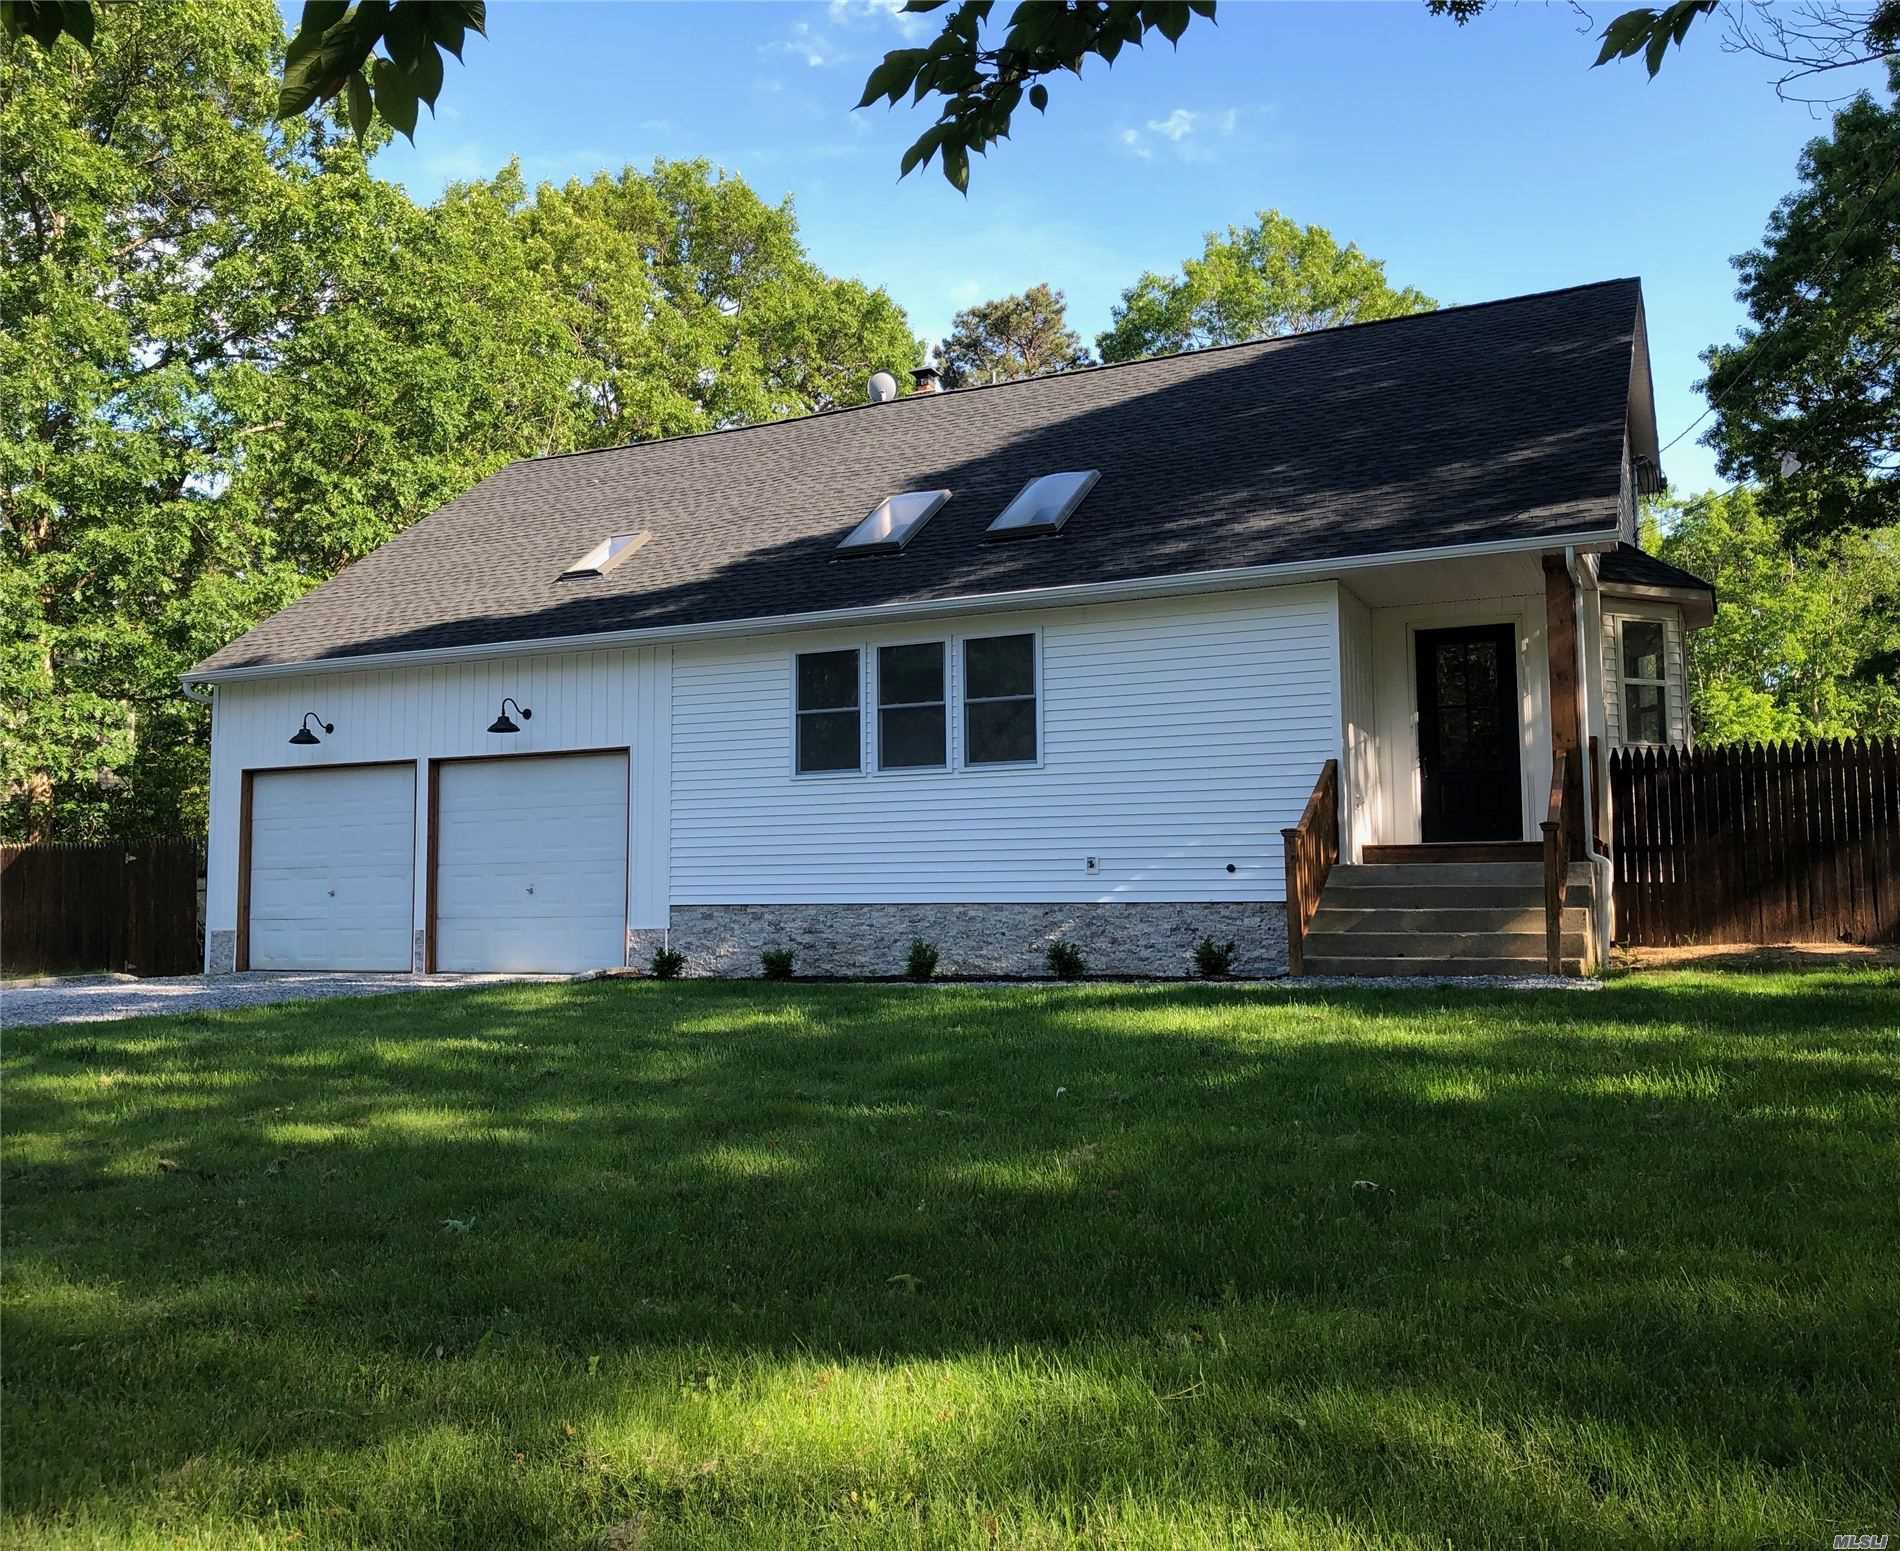 Large cape featuring 5 bedrooms and 3 full baths. Completely renovated home. New roof, all new interior, and driveway. features second story den, 3 car garage with shop area as well as a full unfinished basement with outside entrance.